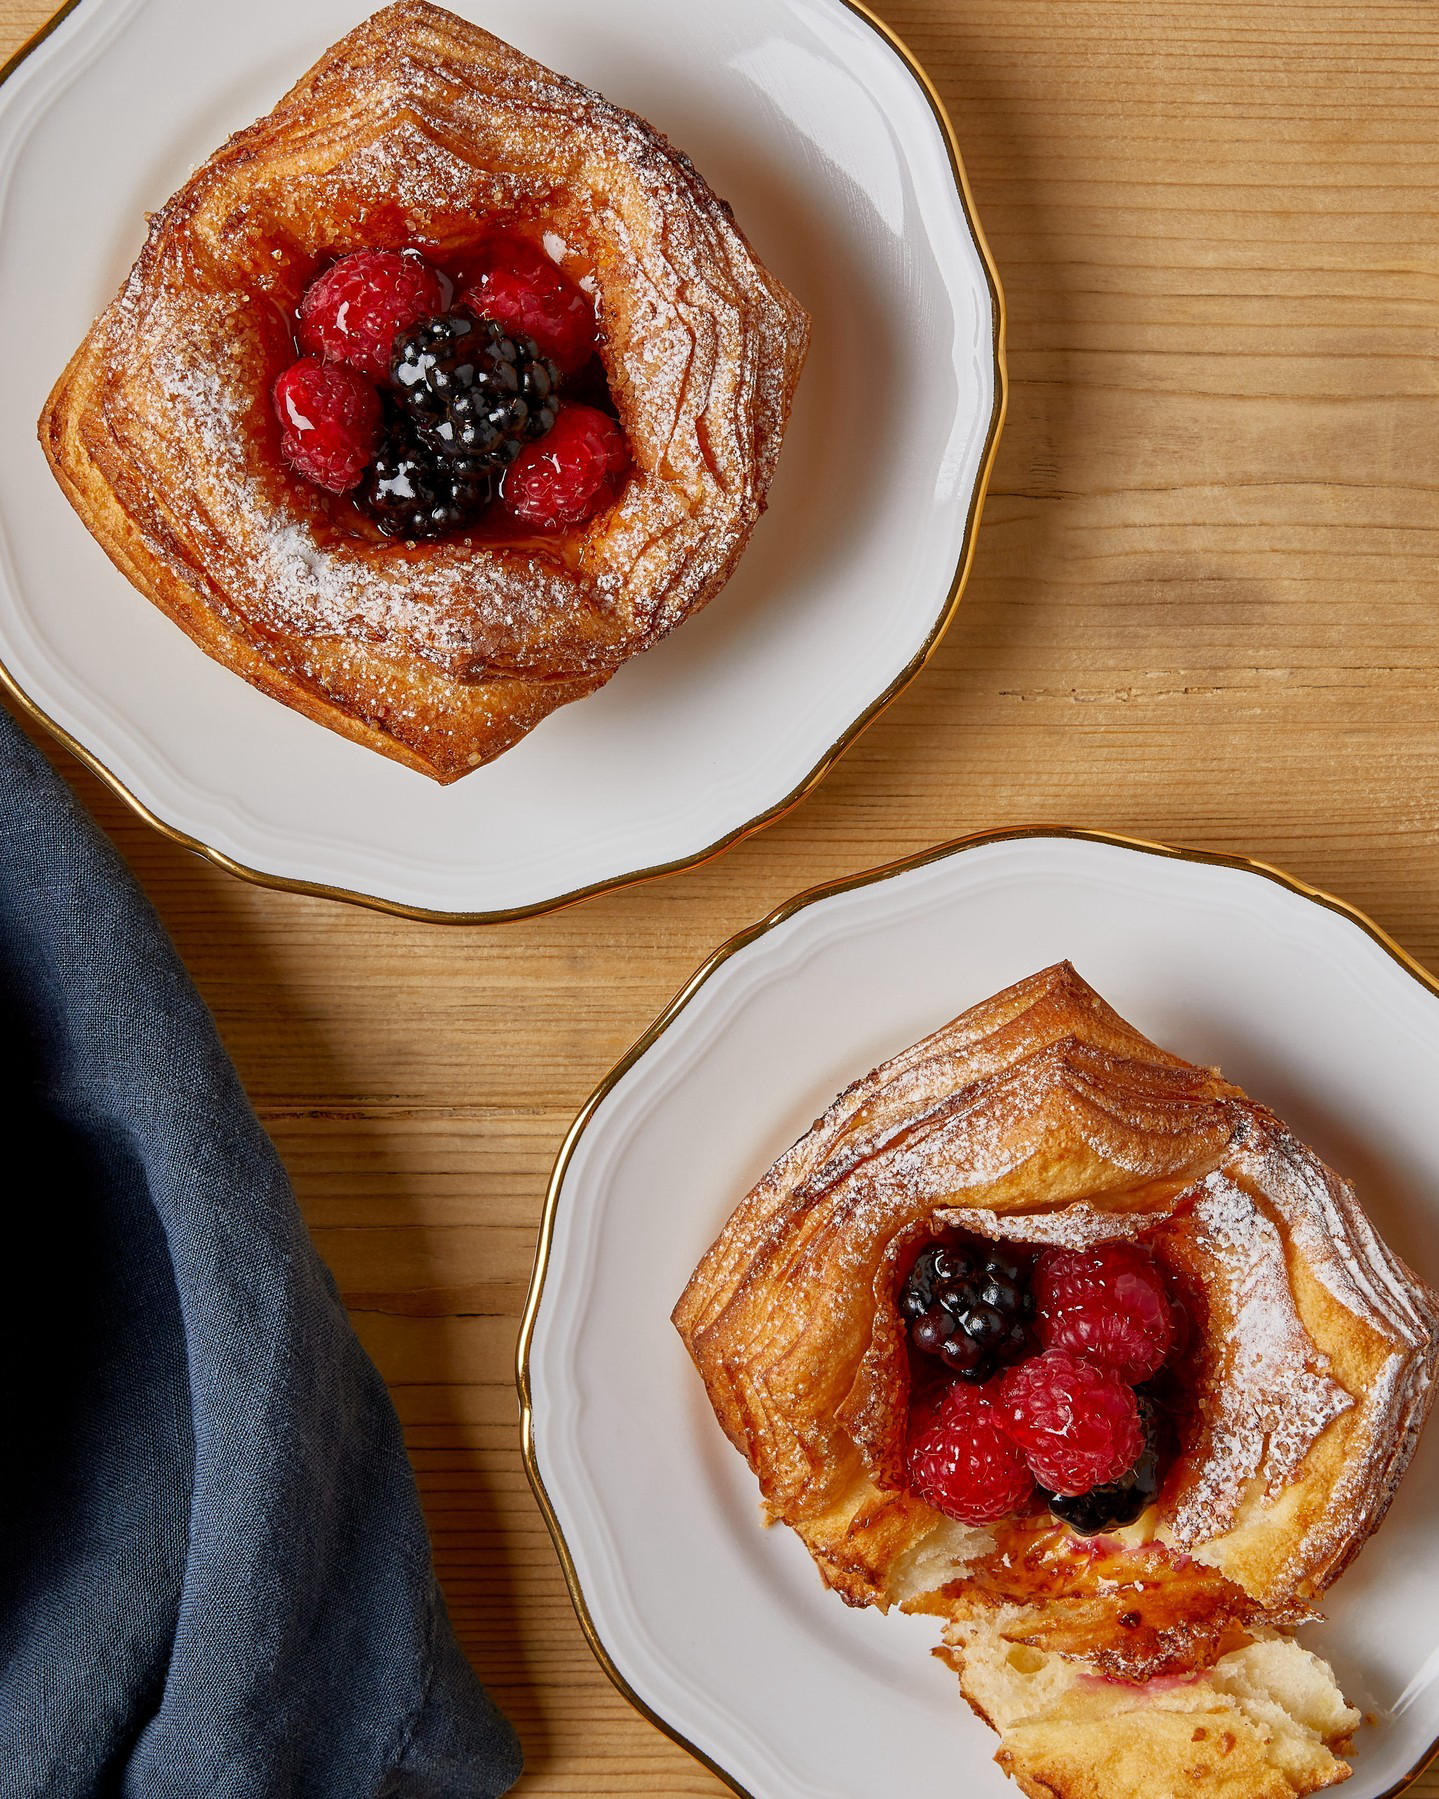 Harrods Food - Break through the flaky outer layers of this Hedgerow Danish and you’ll find a soft c